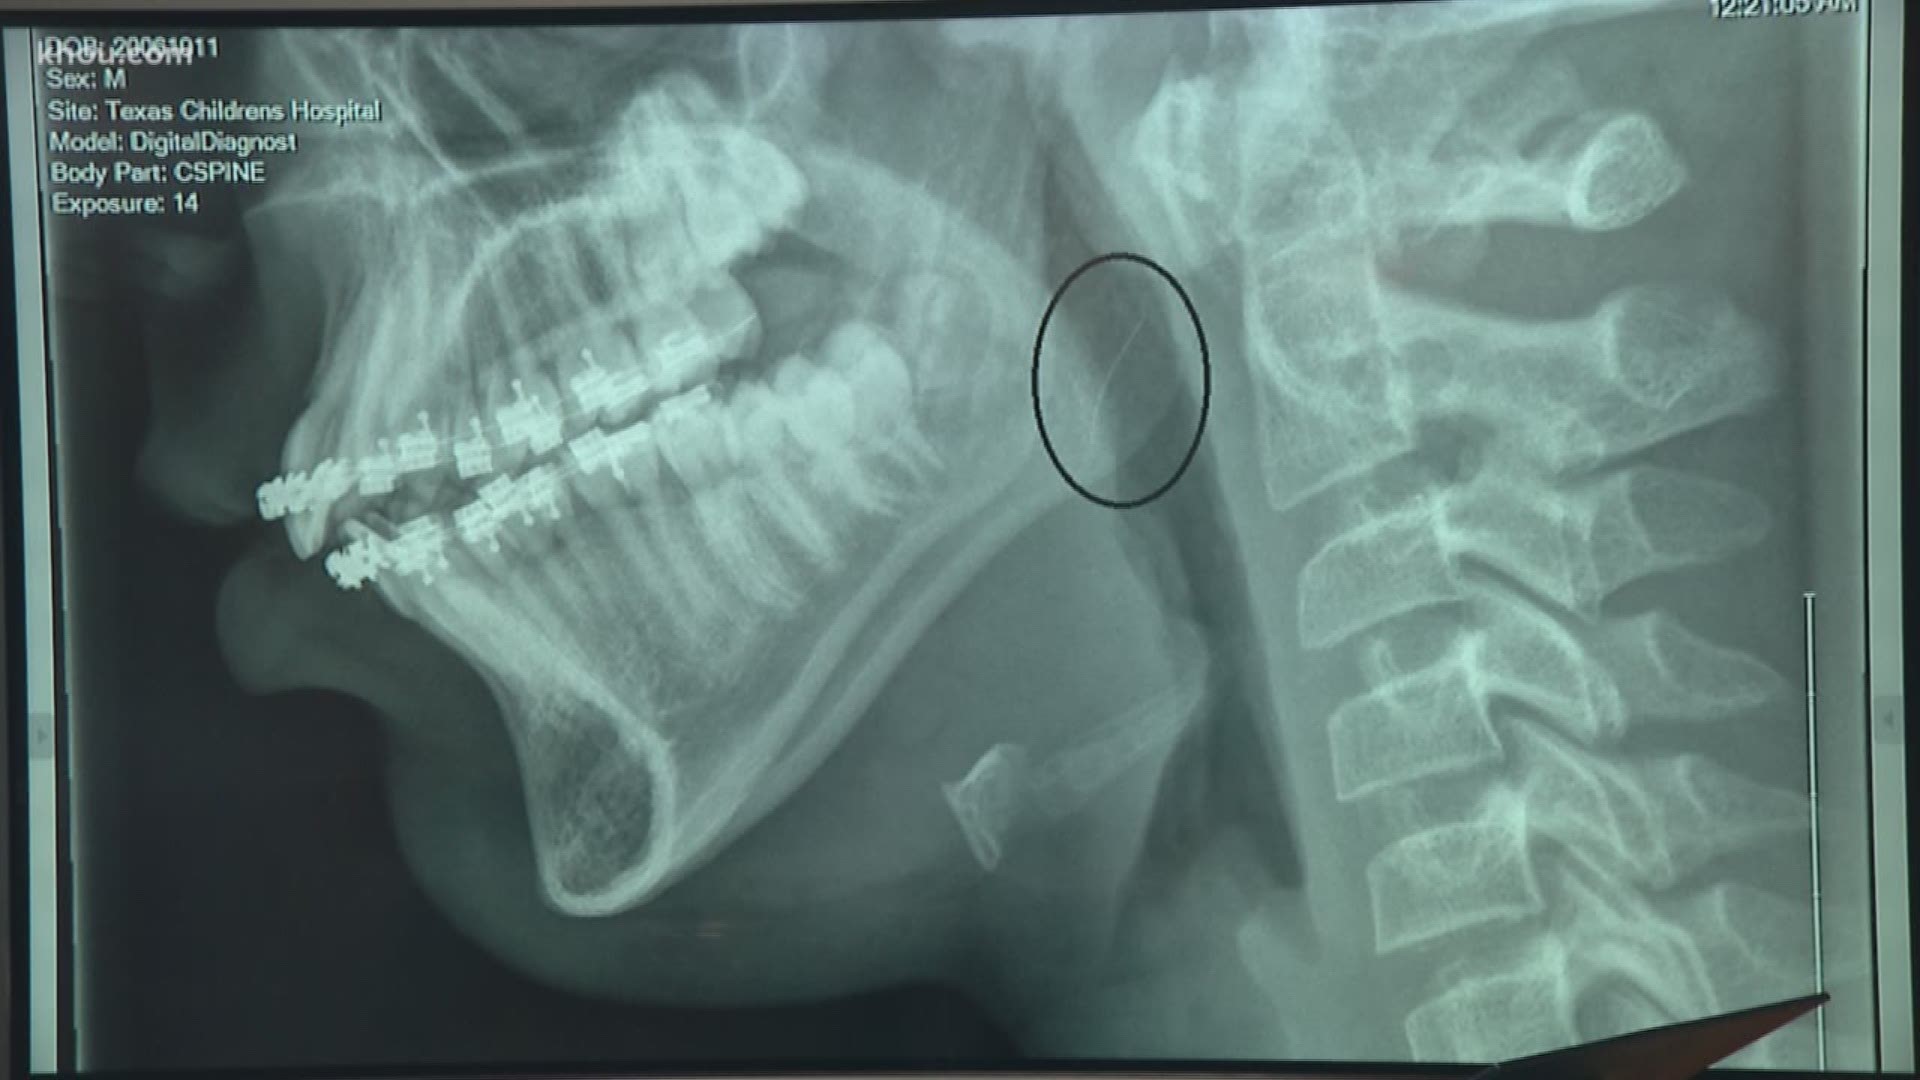 Boy swallows metal piece left from wire grill brush | khou.com